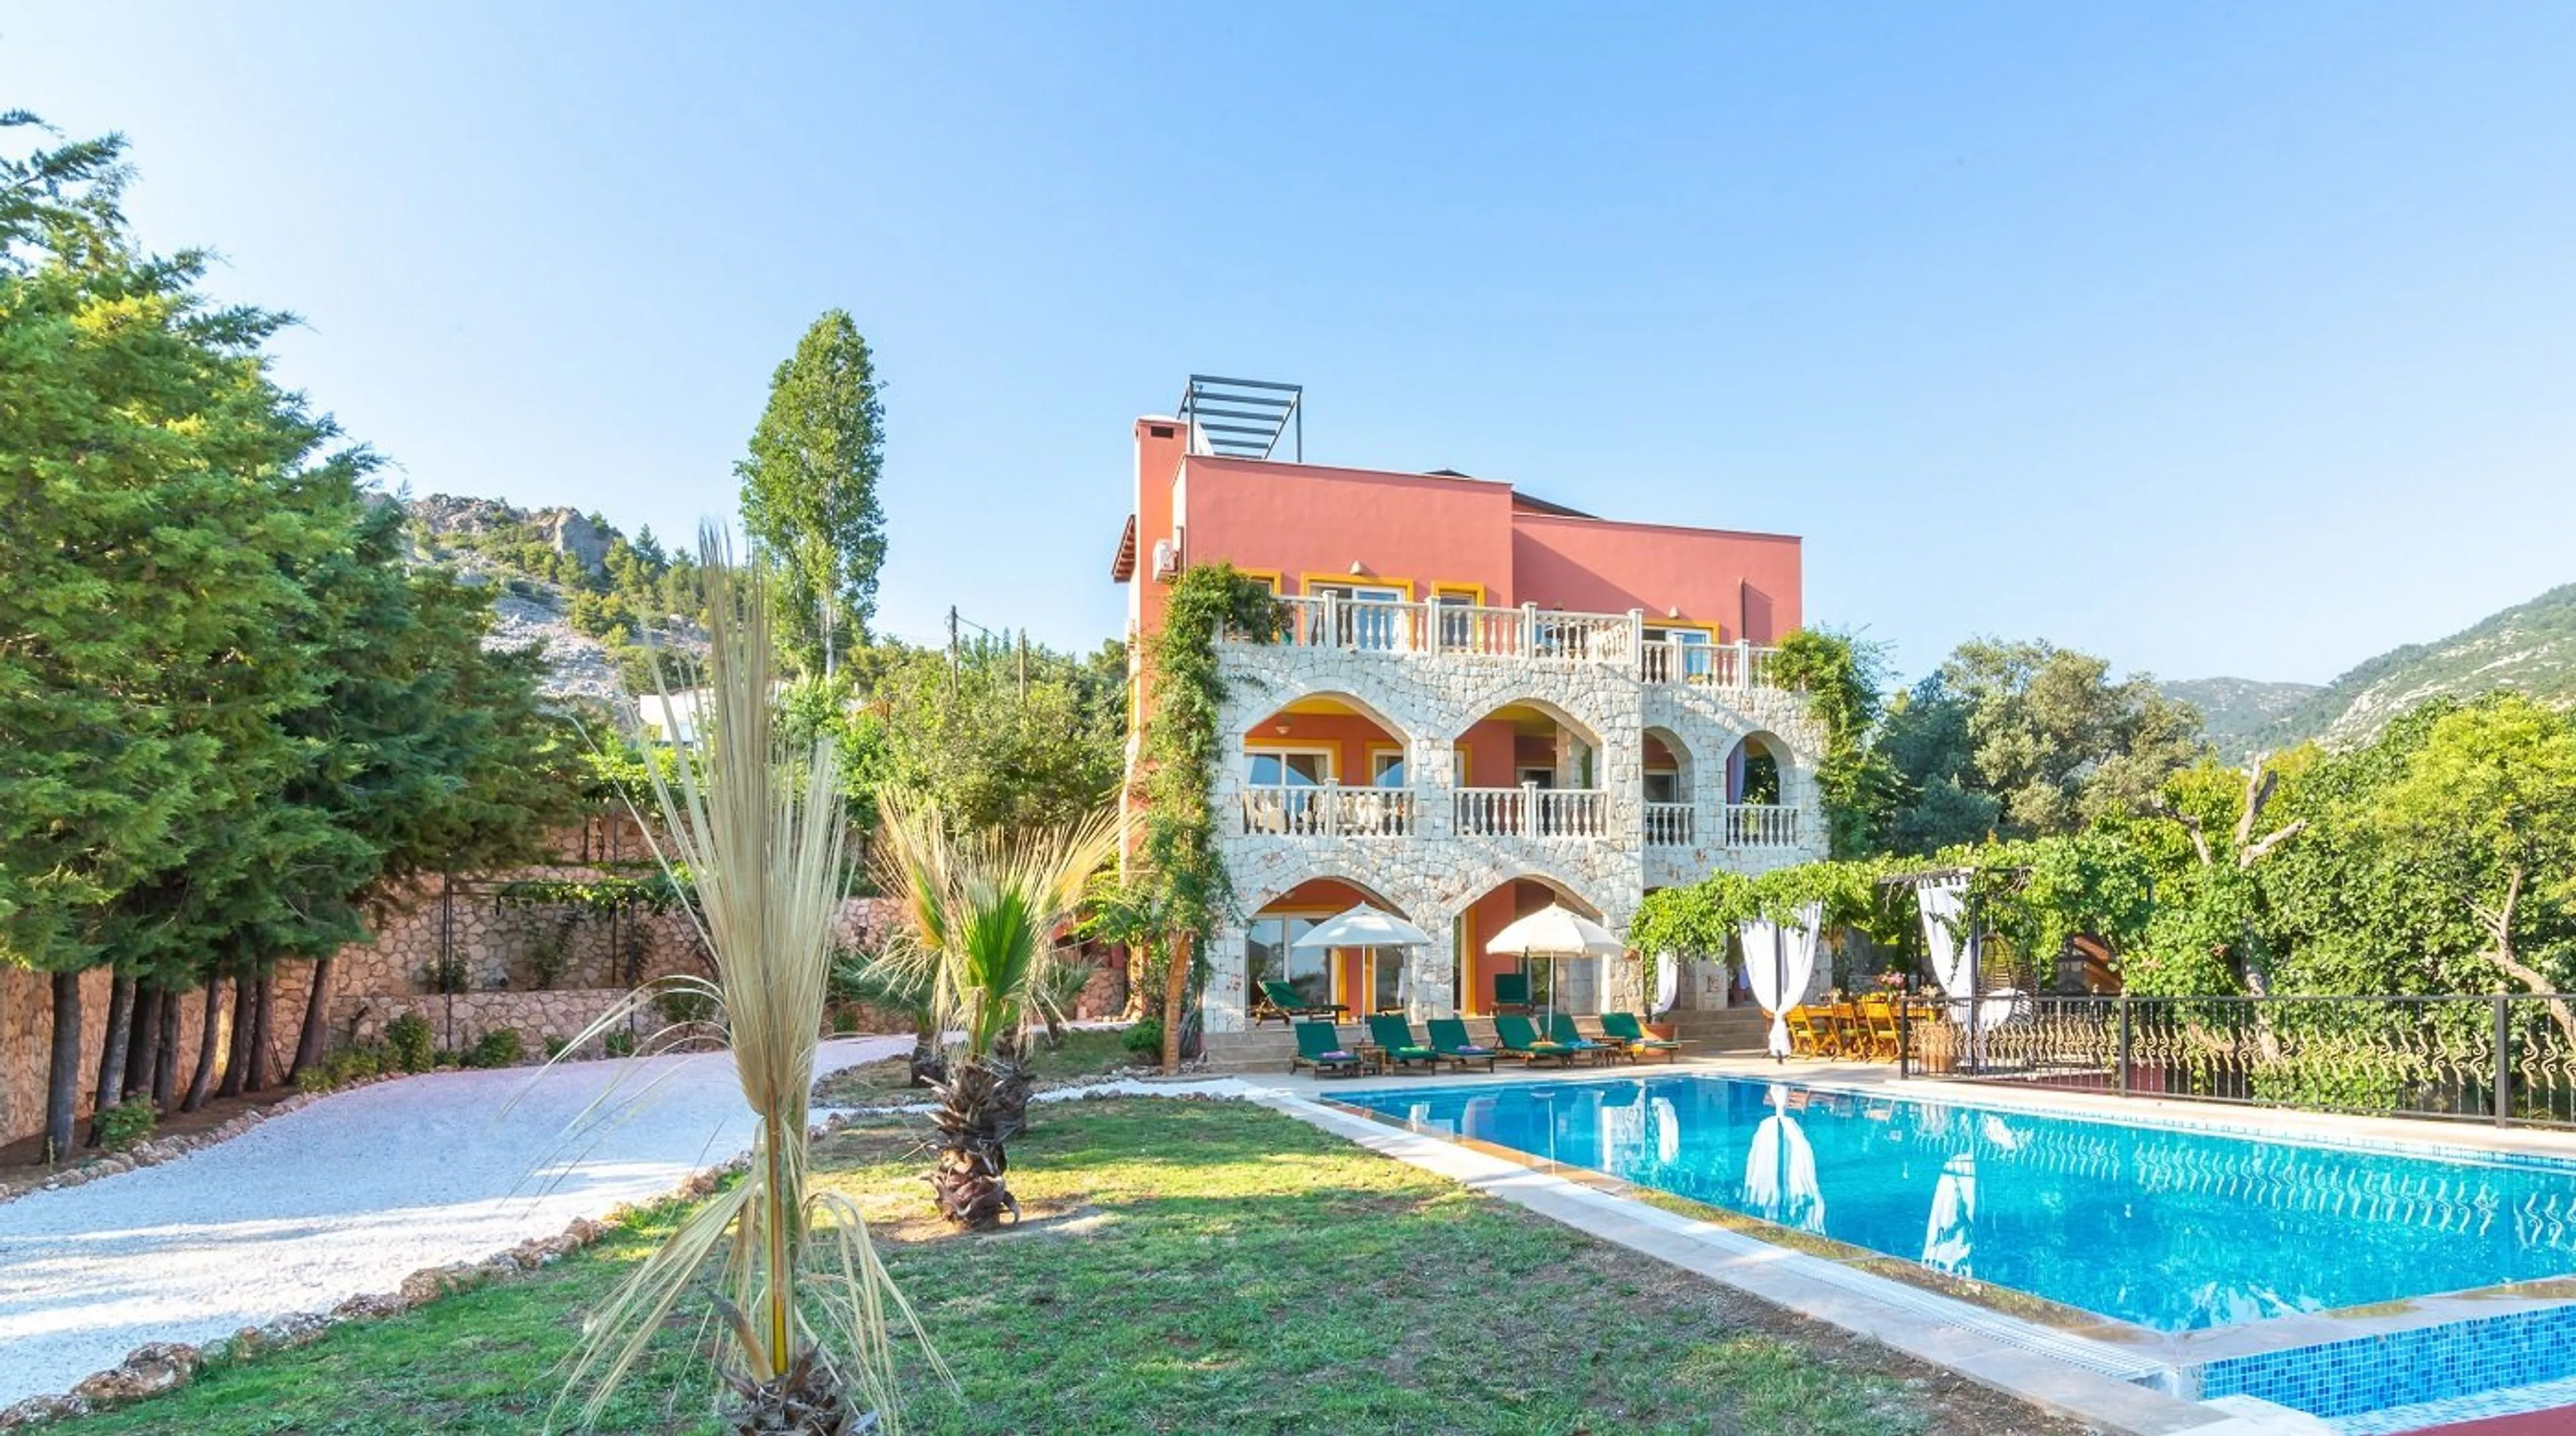 Consider a temporary investment in the beautiful villas of Antalya